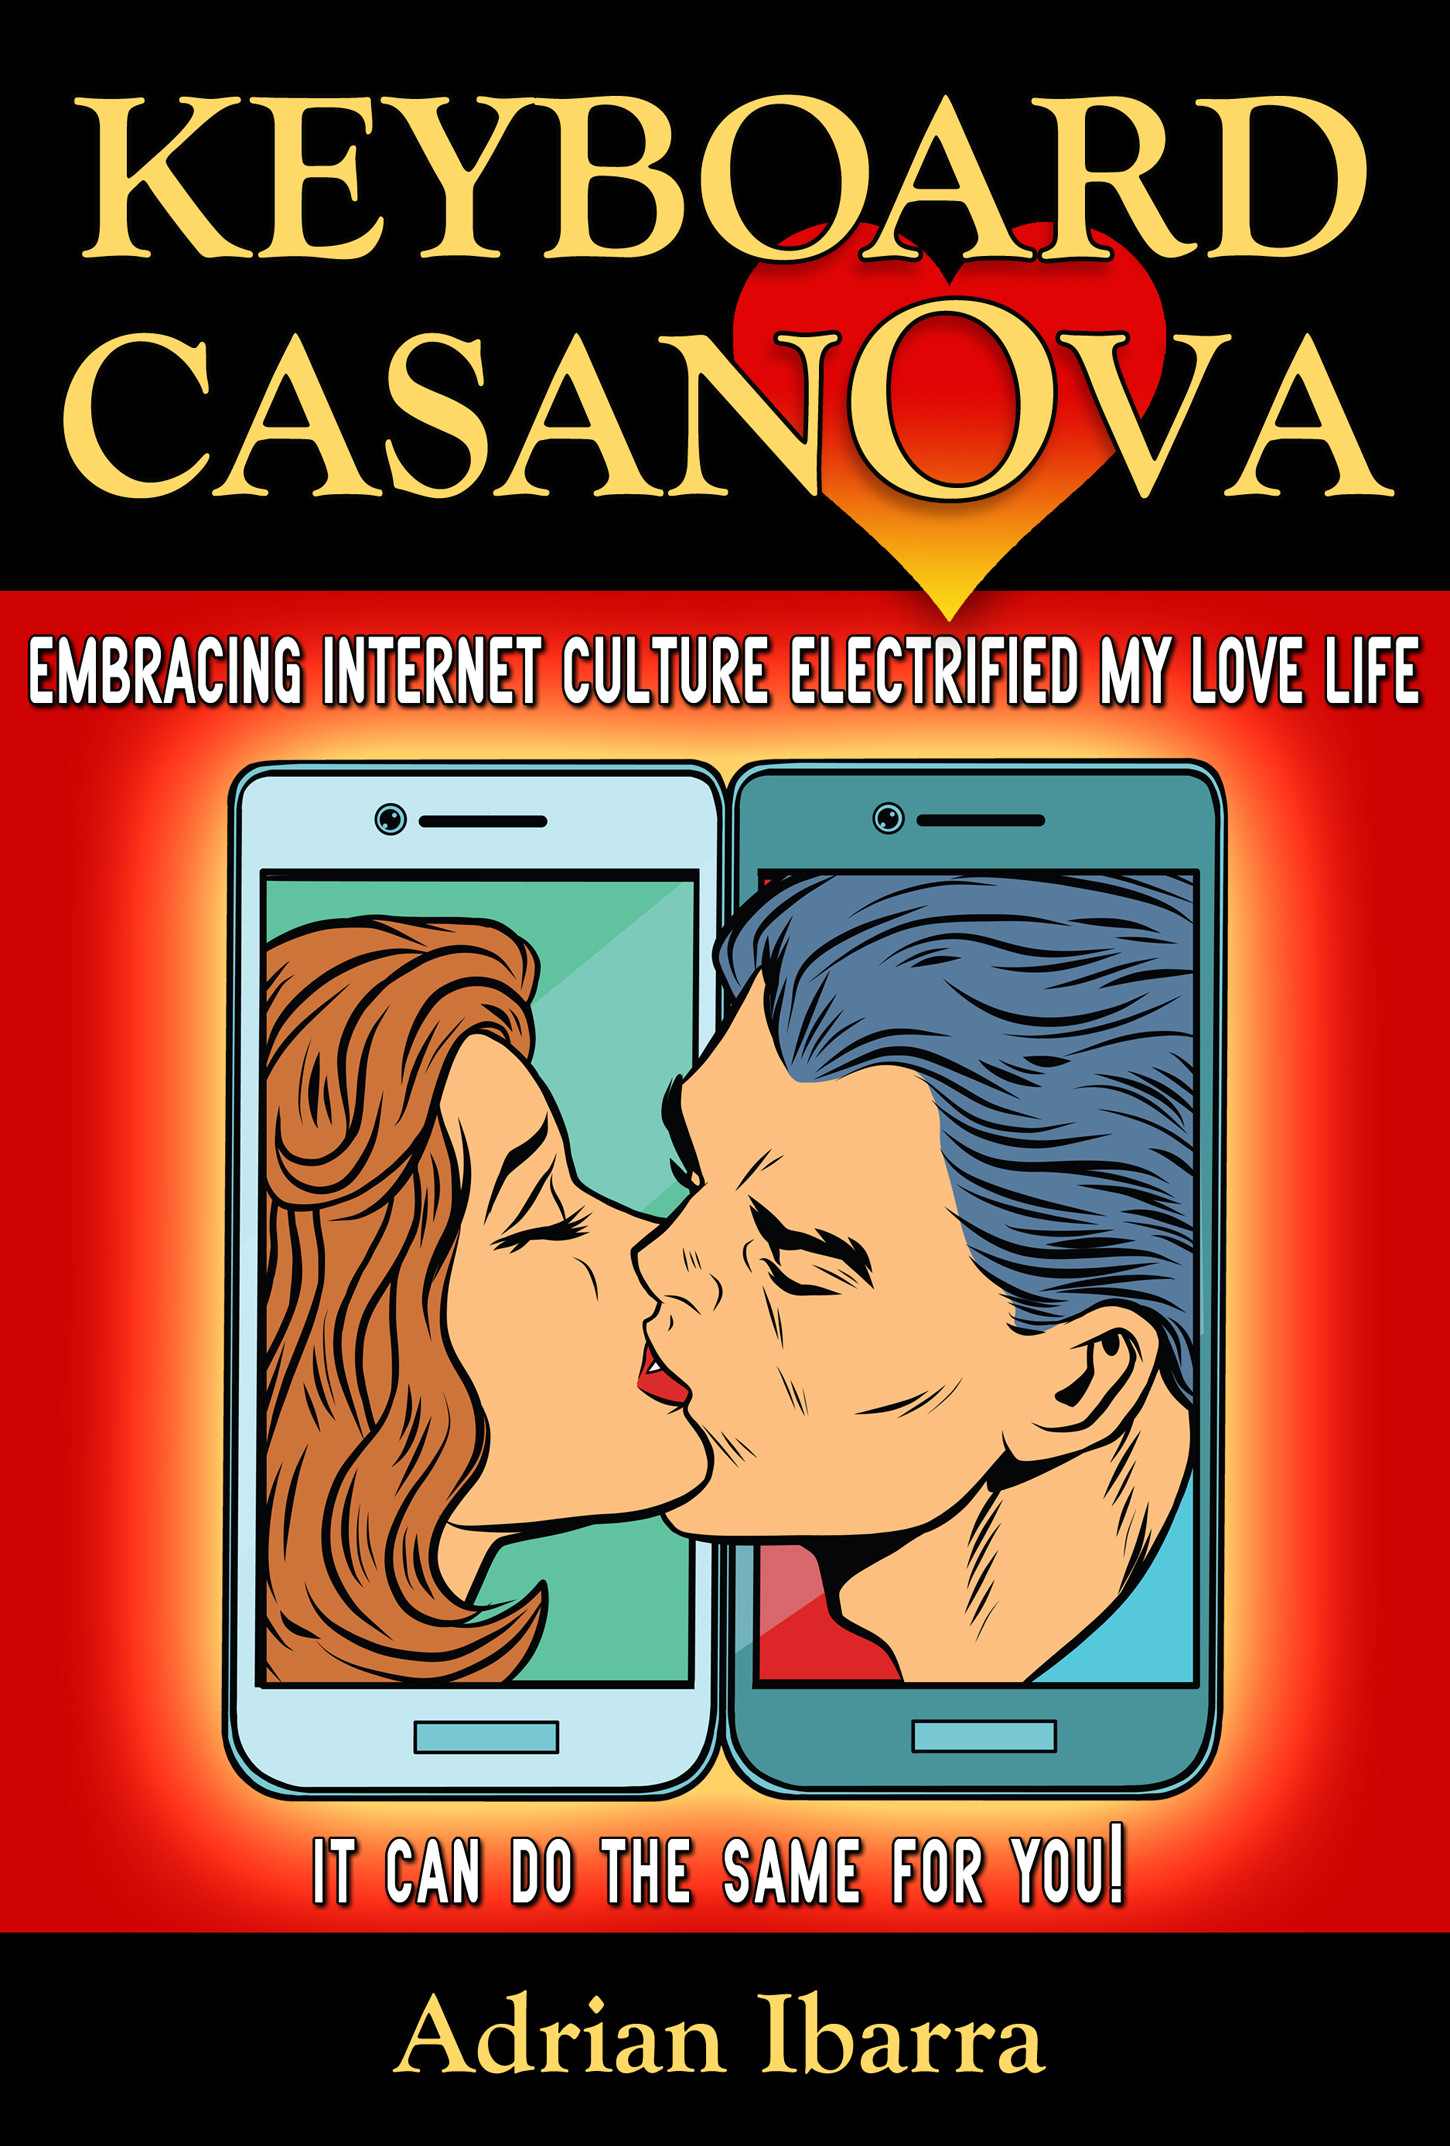 FREE: Keyboard Casanova: Embracing Internet Culture Electrified My Love Life, It Can Do The Same For You! by Adrian Ibarra